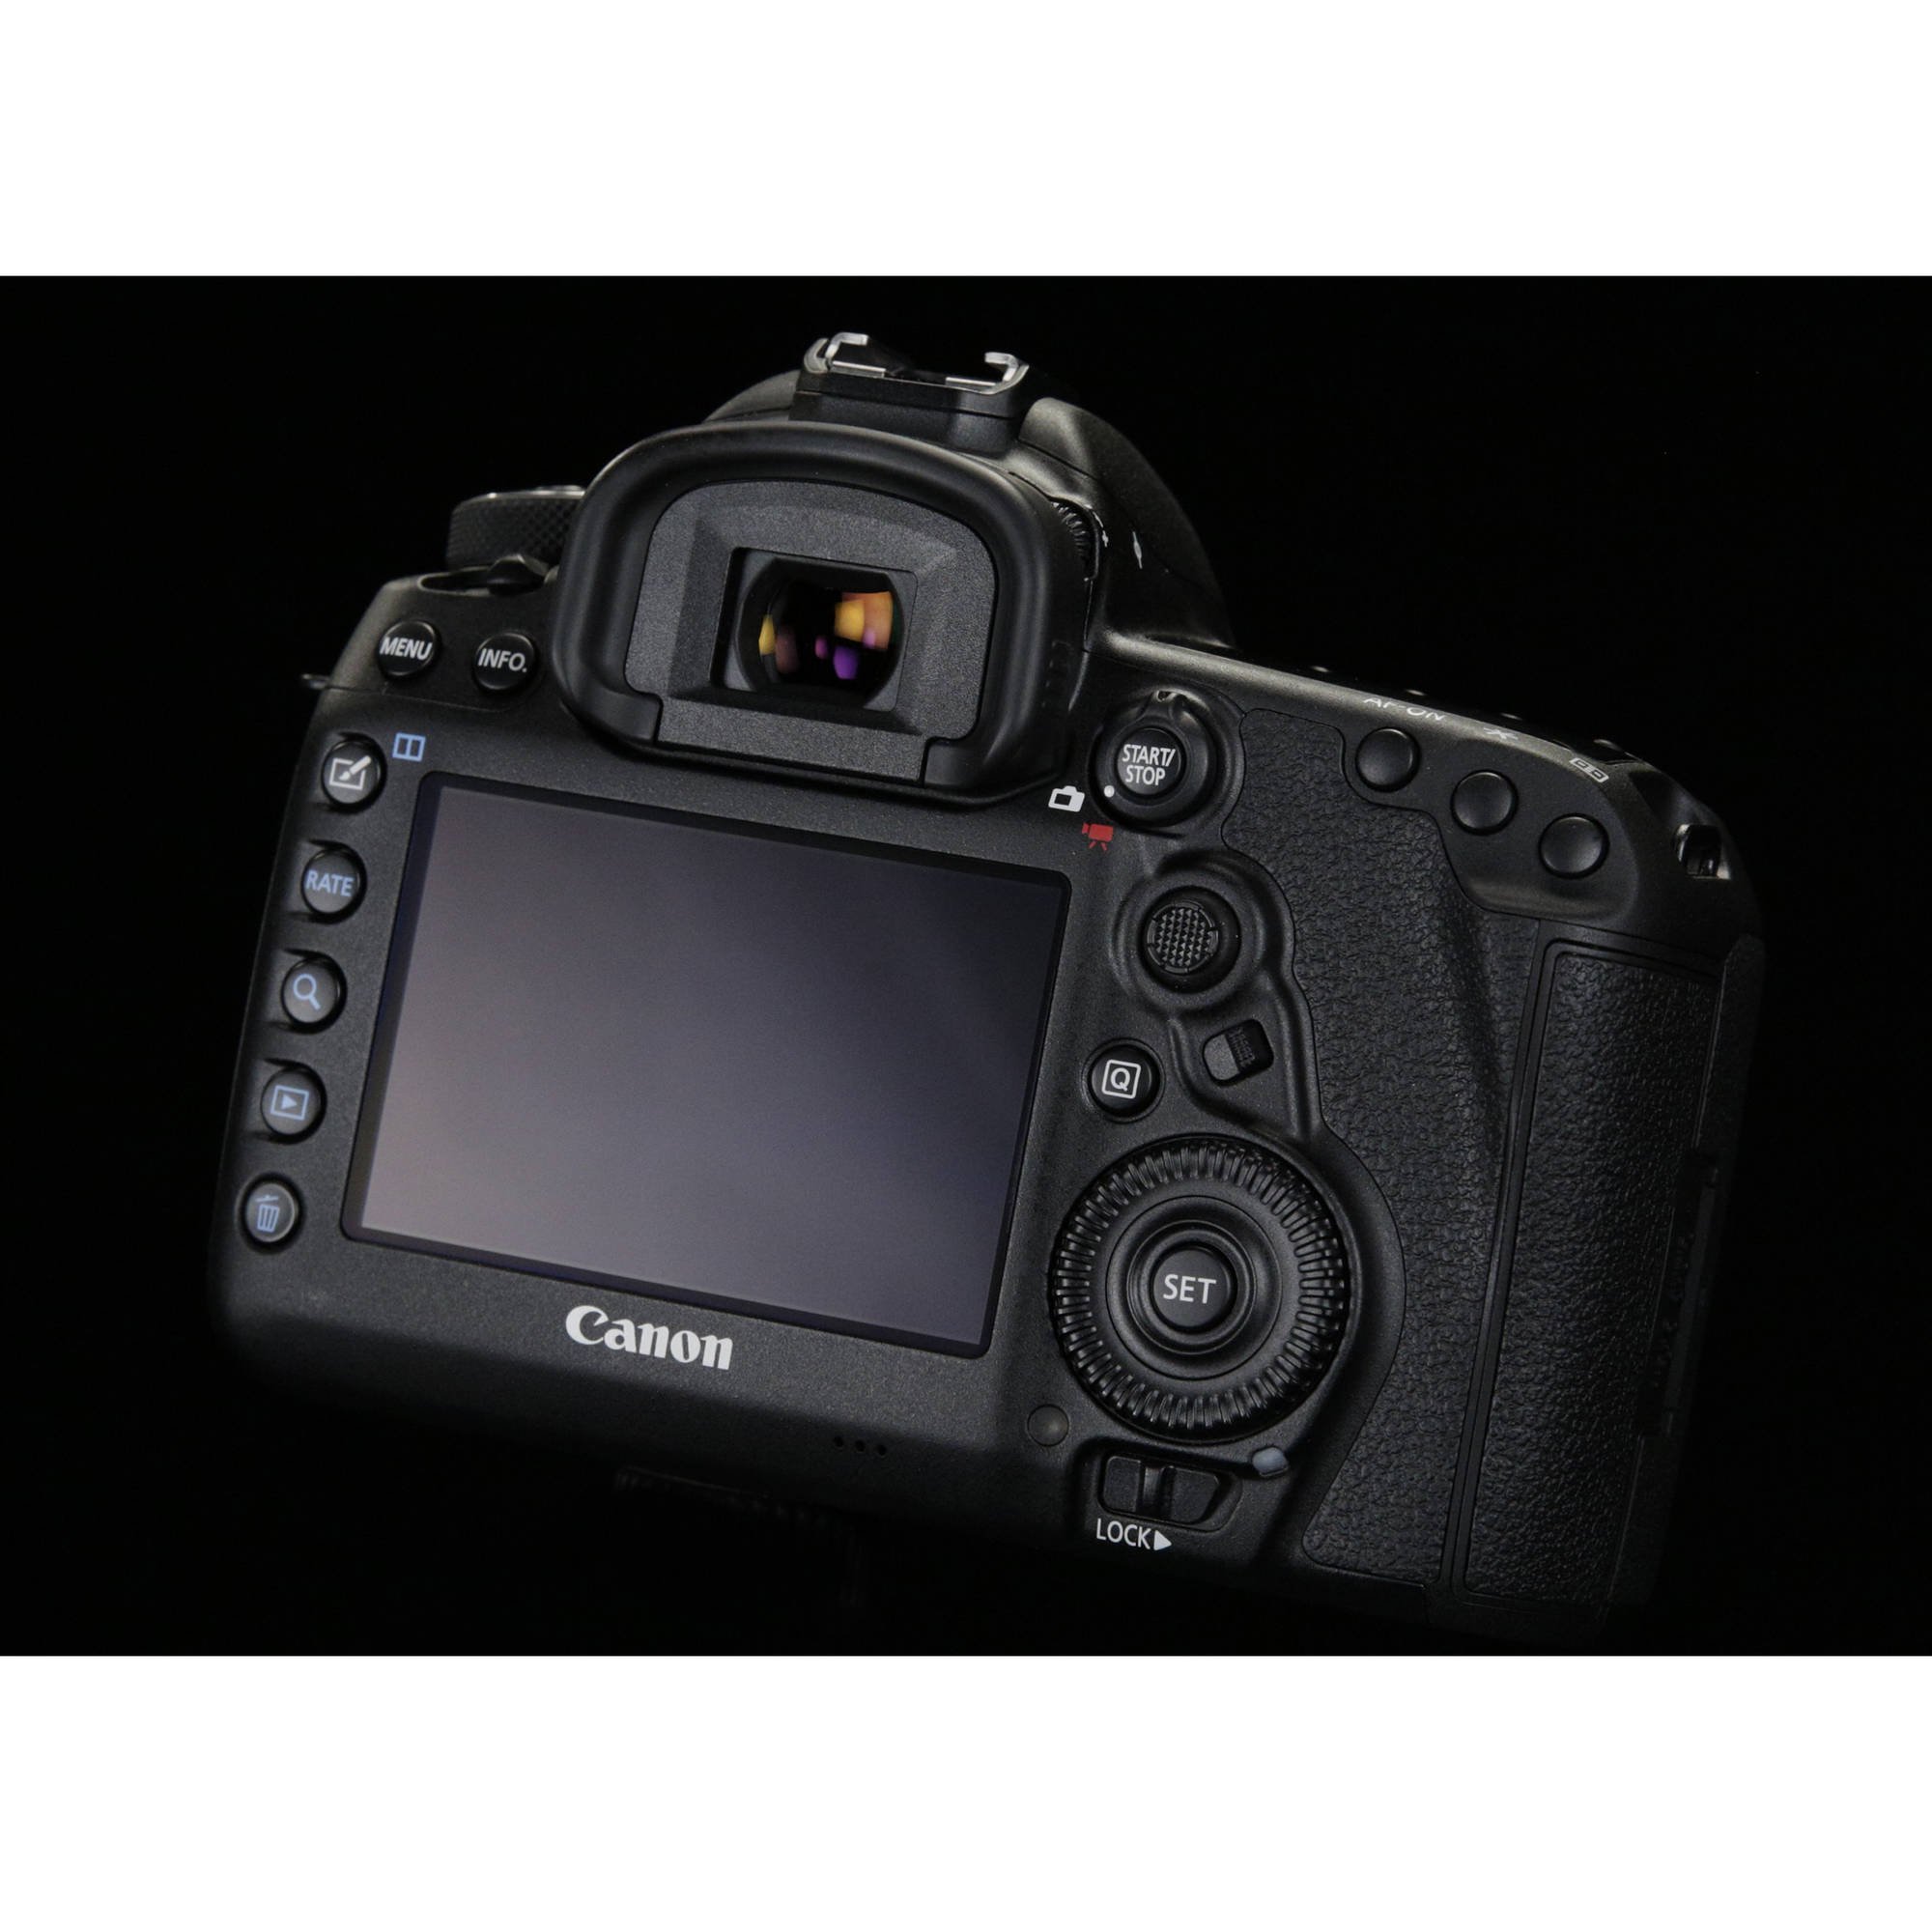 Canon EOS 5D Mark IV DSLR Camera International Version (No Warranty)(Body Only) + Professional Cleaning Kit - image 3 of 5